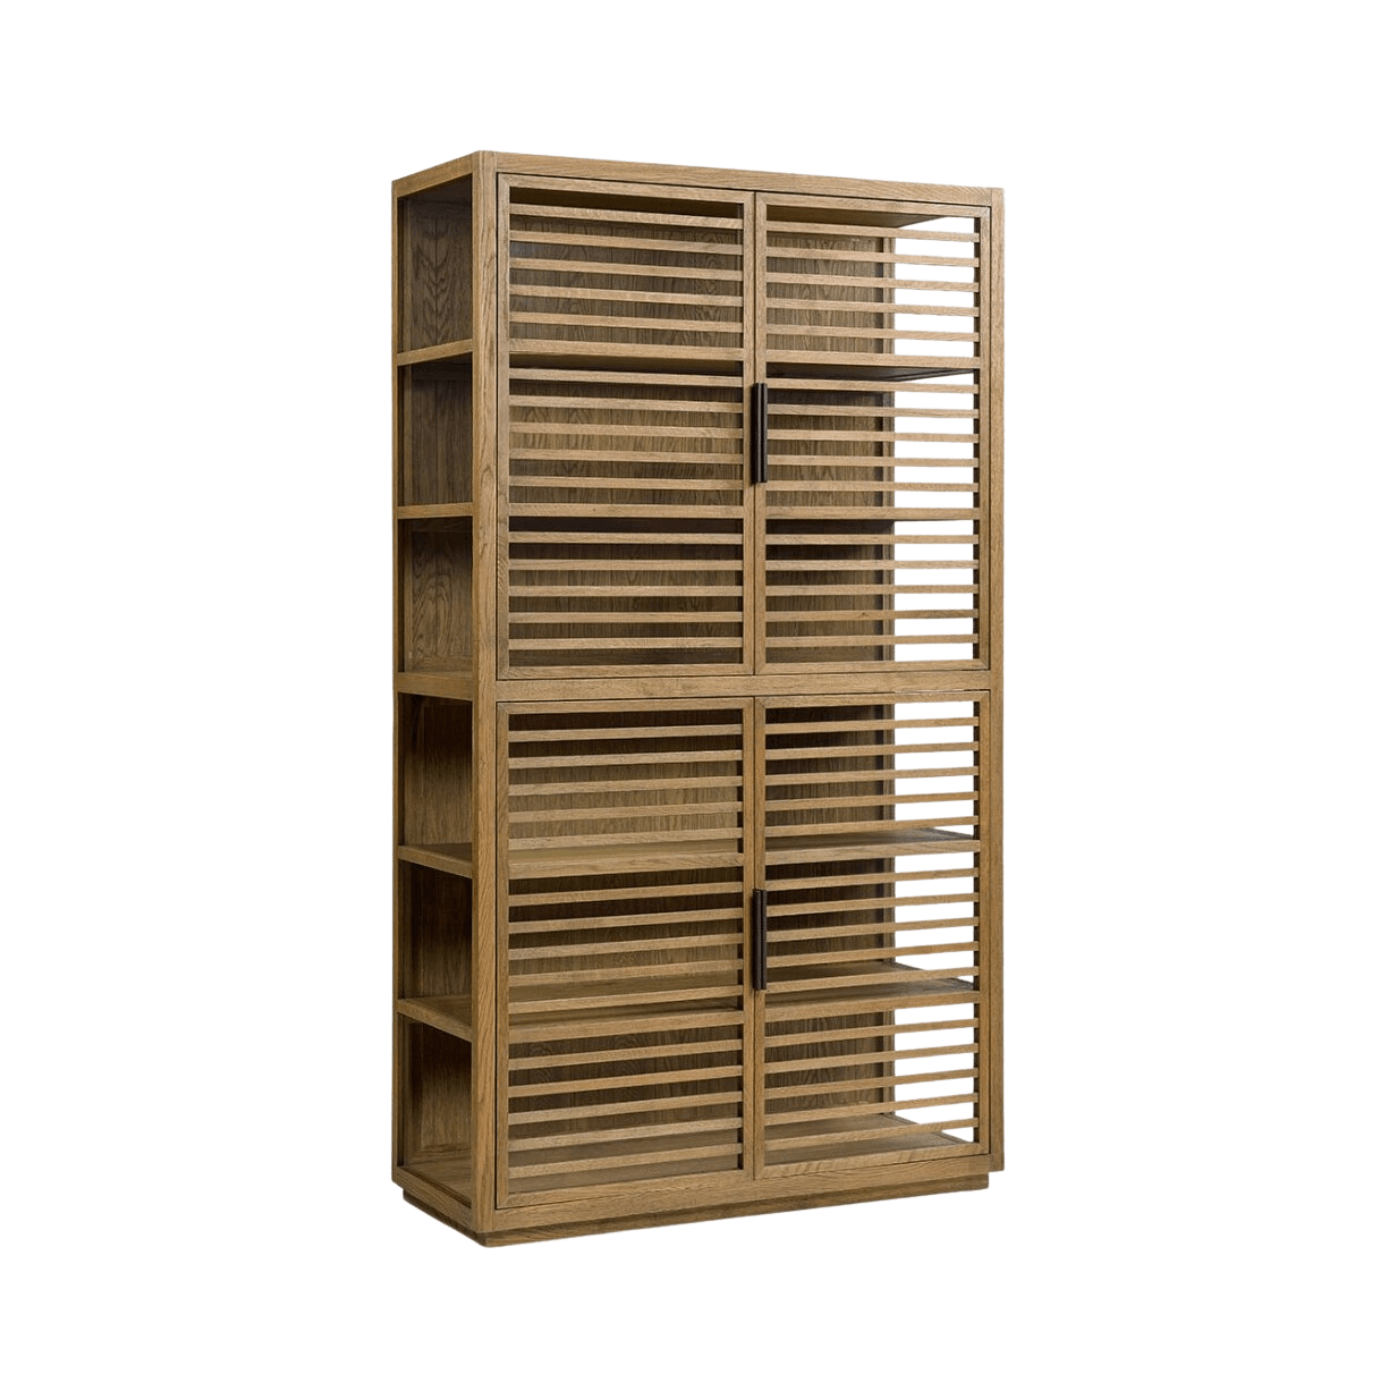 Granada Natural Oak Cabinet with Tempered Glass Doors - Maison Rêves UK